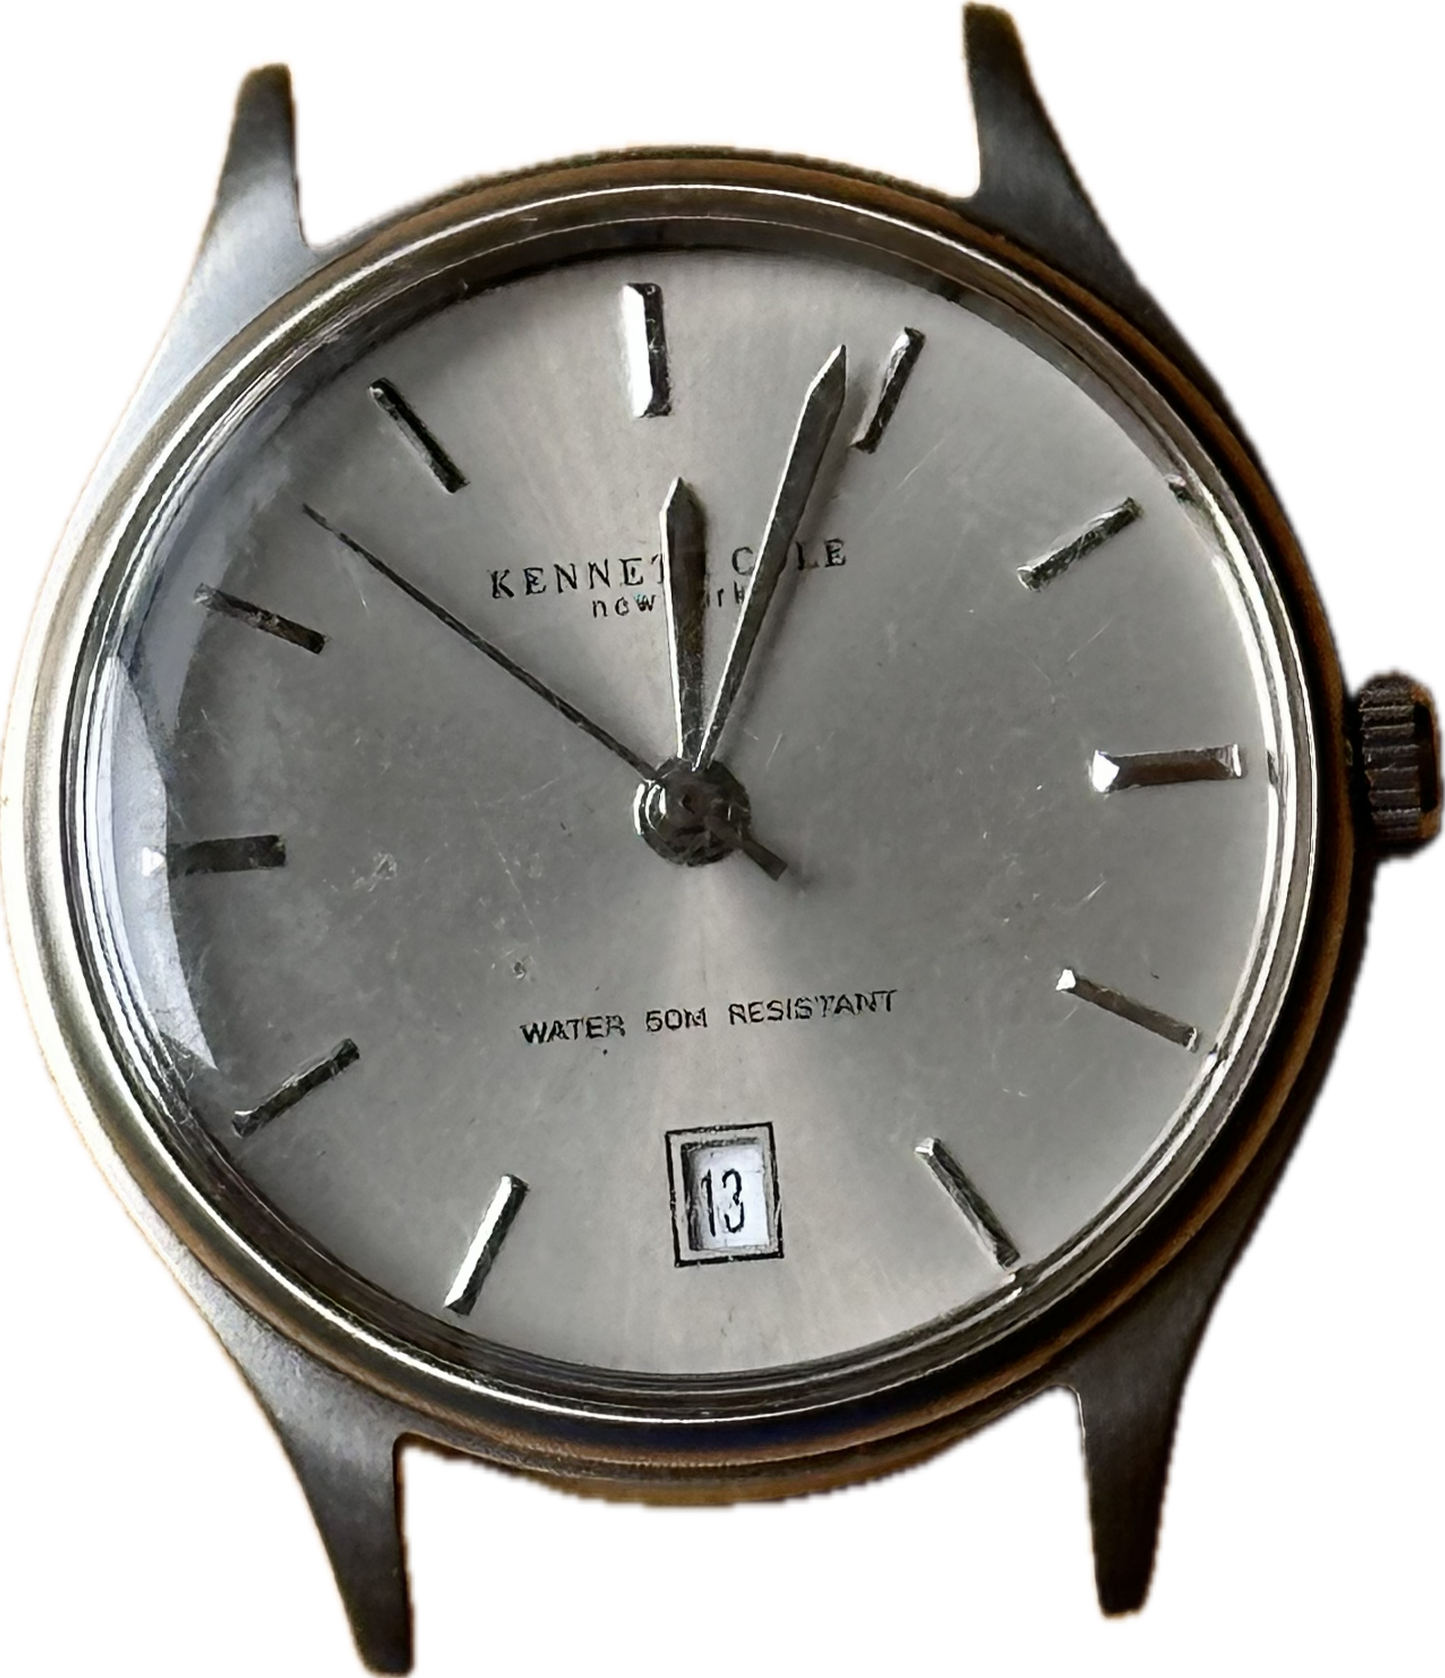 NEW GIRL: Schmidt's Kenneth Cole Watch Faceplates (2)